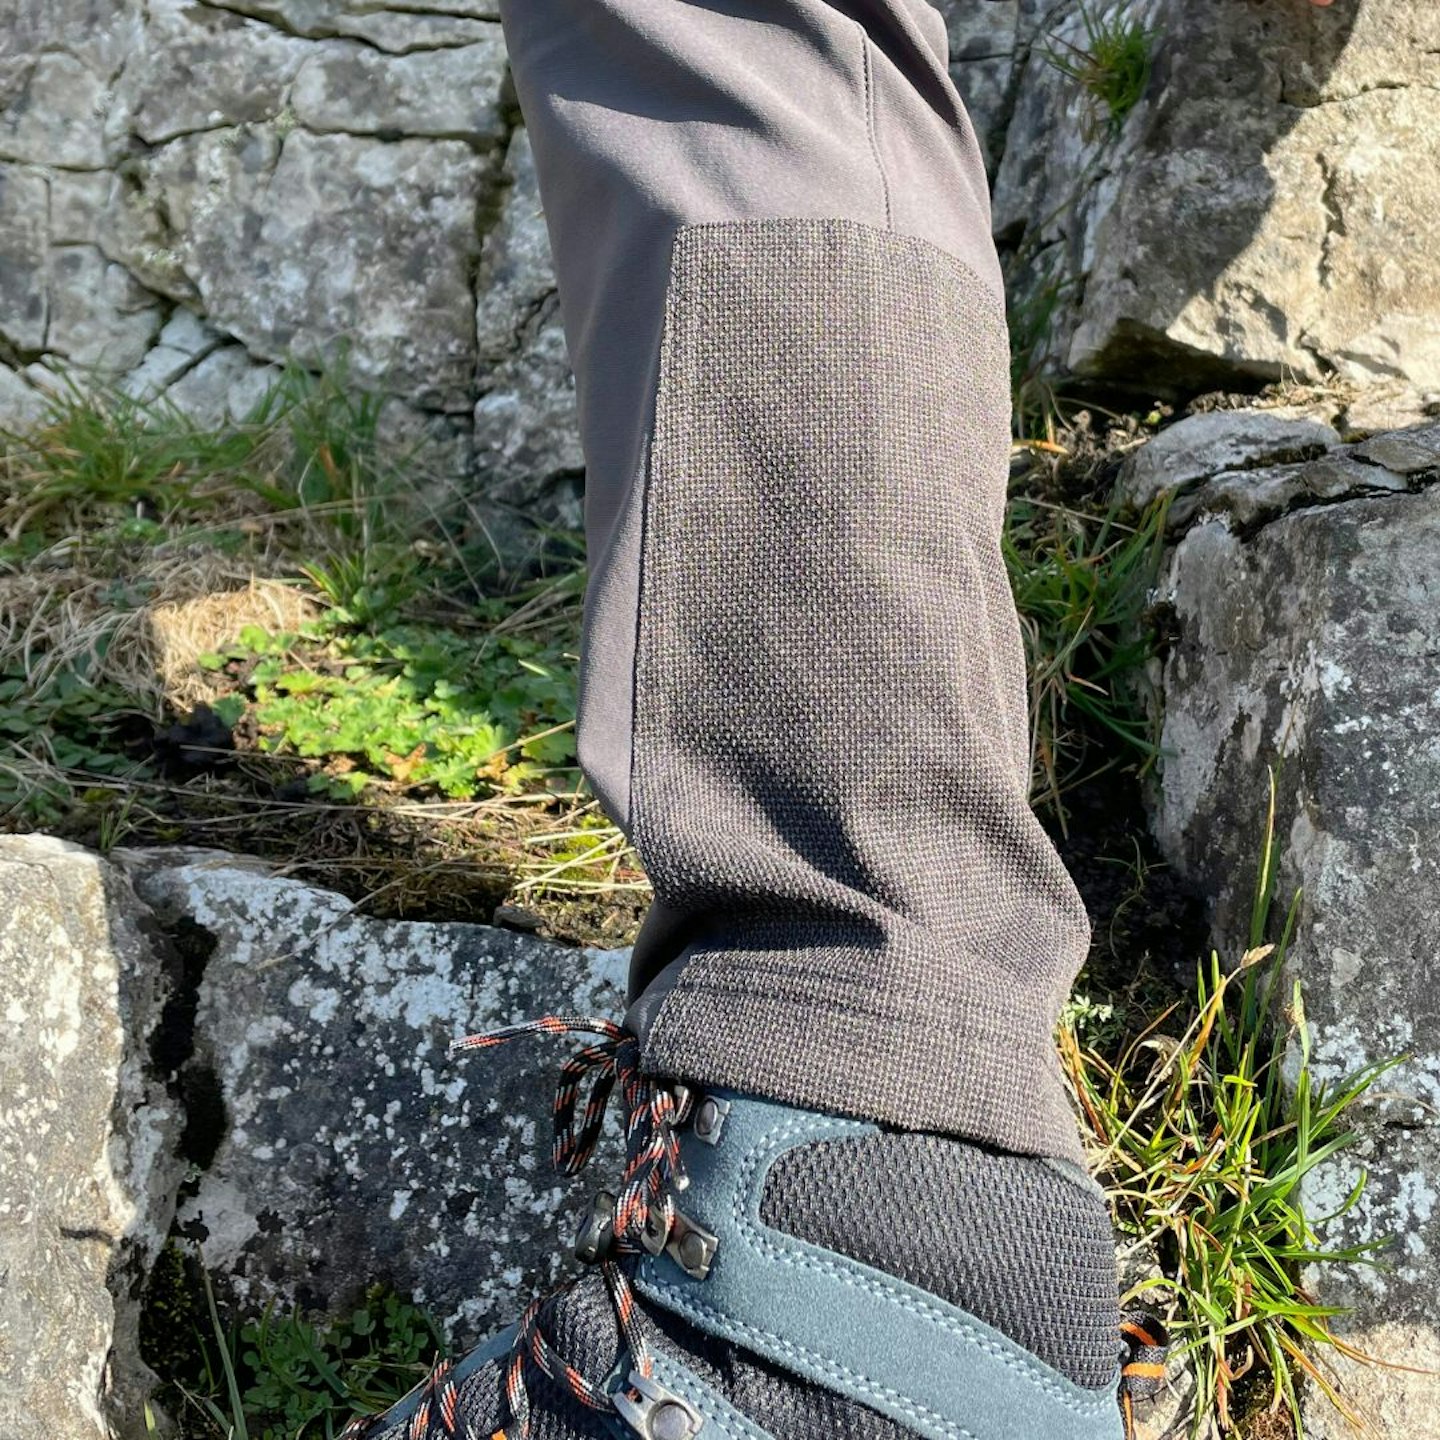 Hiking Trousers: 6 Of The Best Hiking Trousers - Mpora